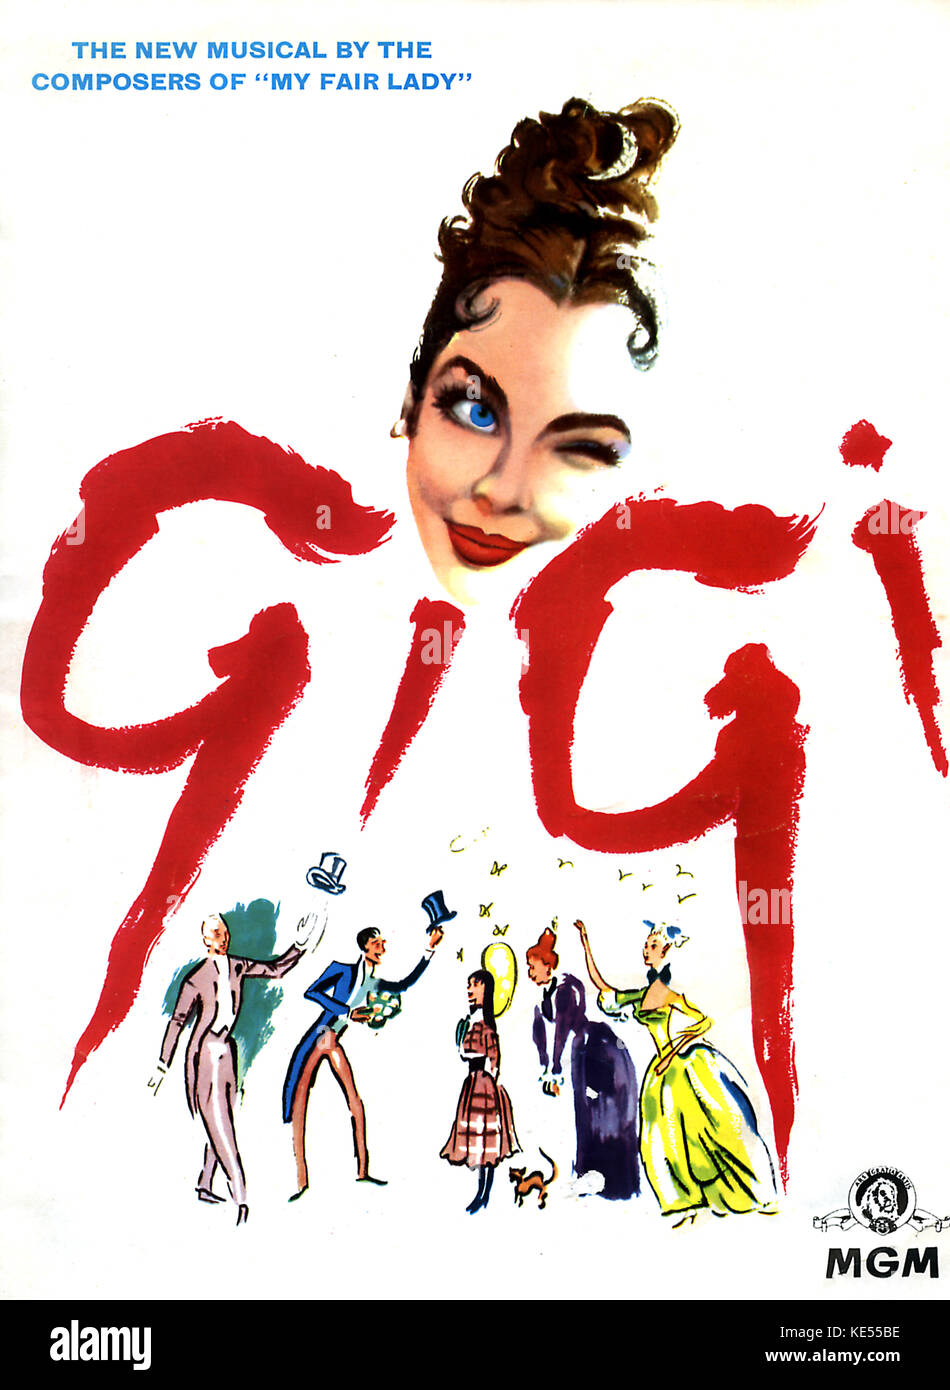 Gigi by Frederick Loewe, film souvenir programme     Lyrics by Jay Lerner Published   London 1958. (JL: 10 June 1901 - 14 February 1988.) Film made in 1958  by MGM. Based on 1944 novella of the same name by Colette. Stock Photo